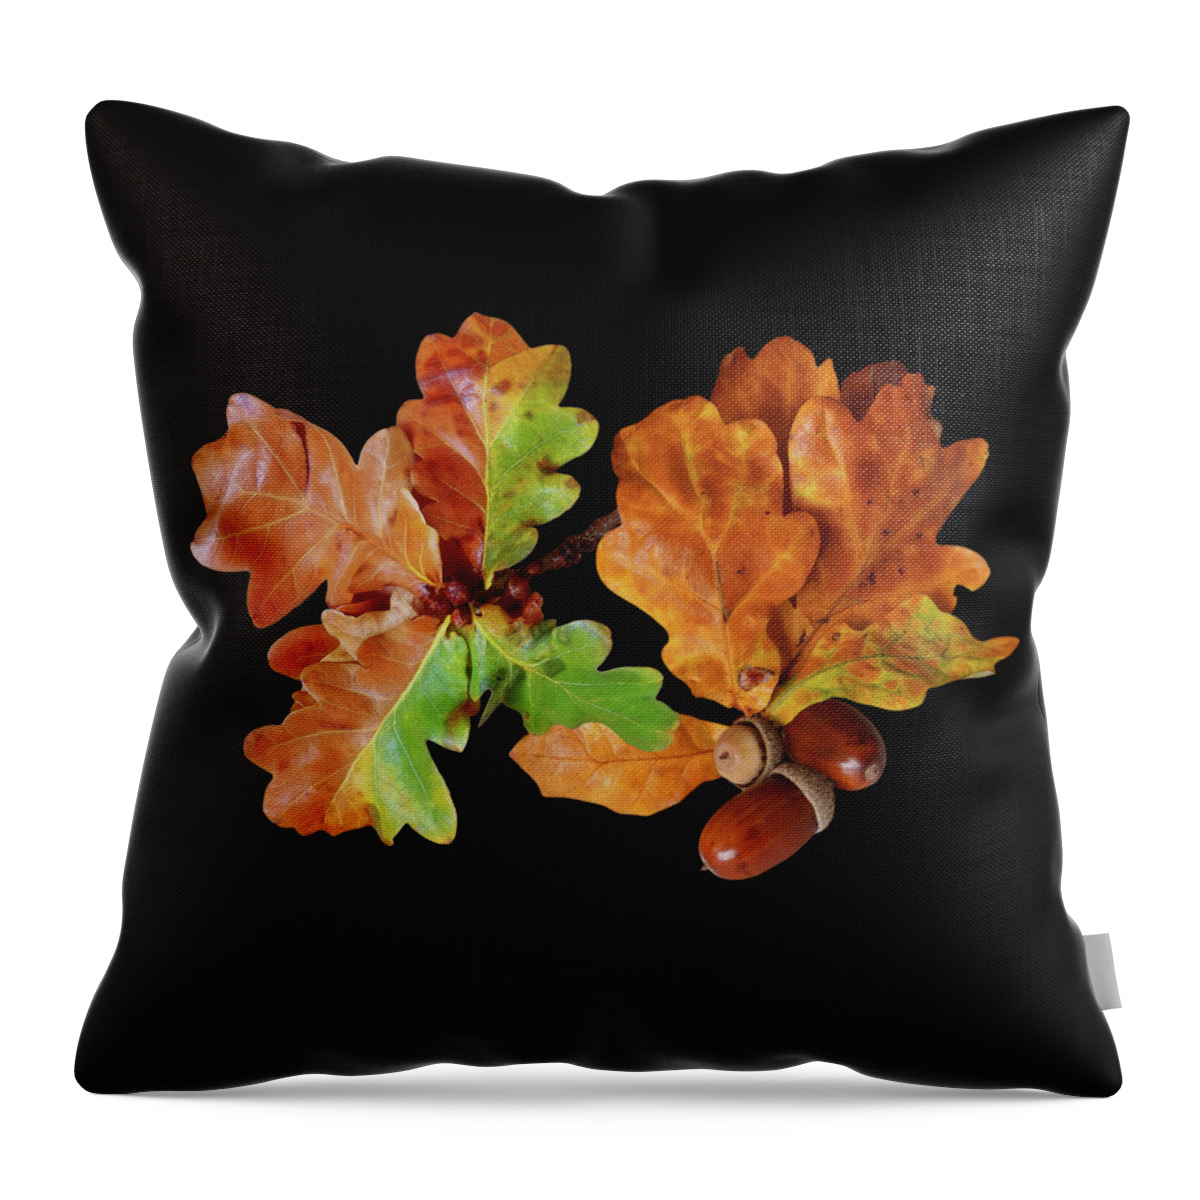 Autumn Leaves Throw Pillow featuring the photograph Oak Leaves And Acorns On Black by Gill Billington